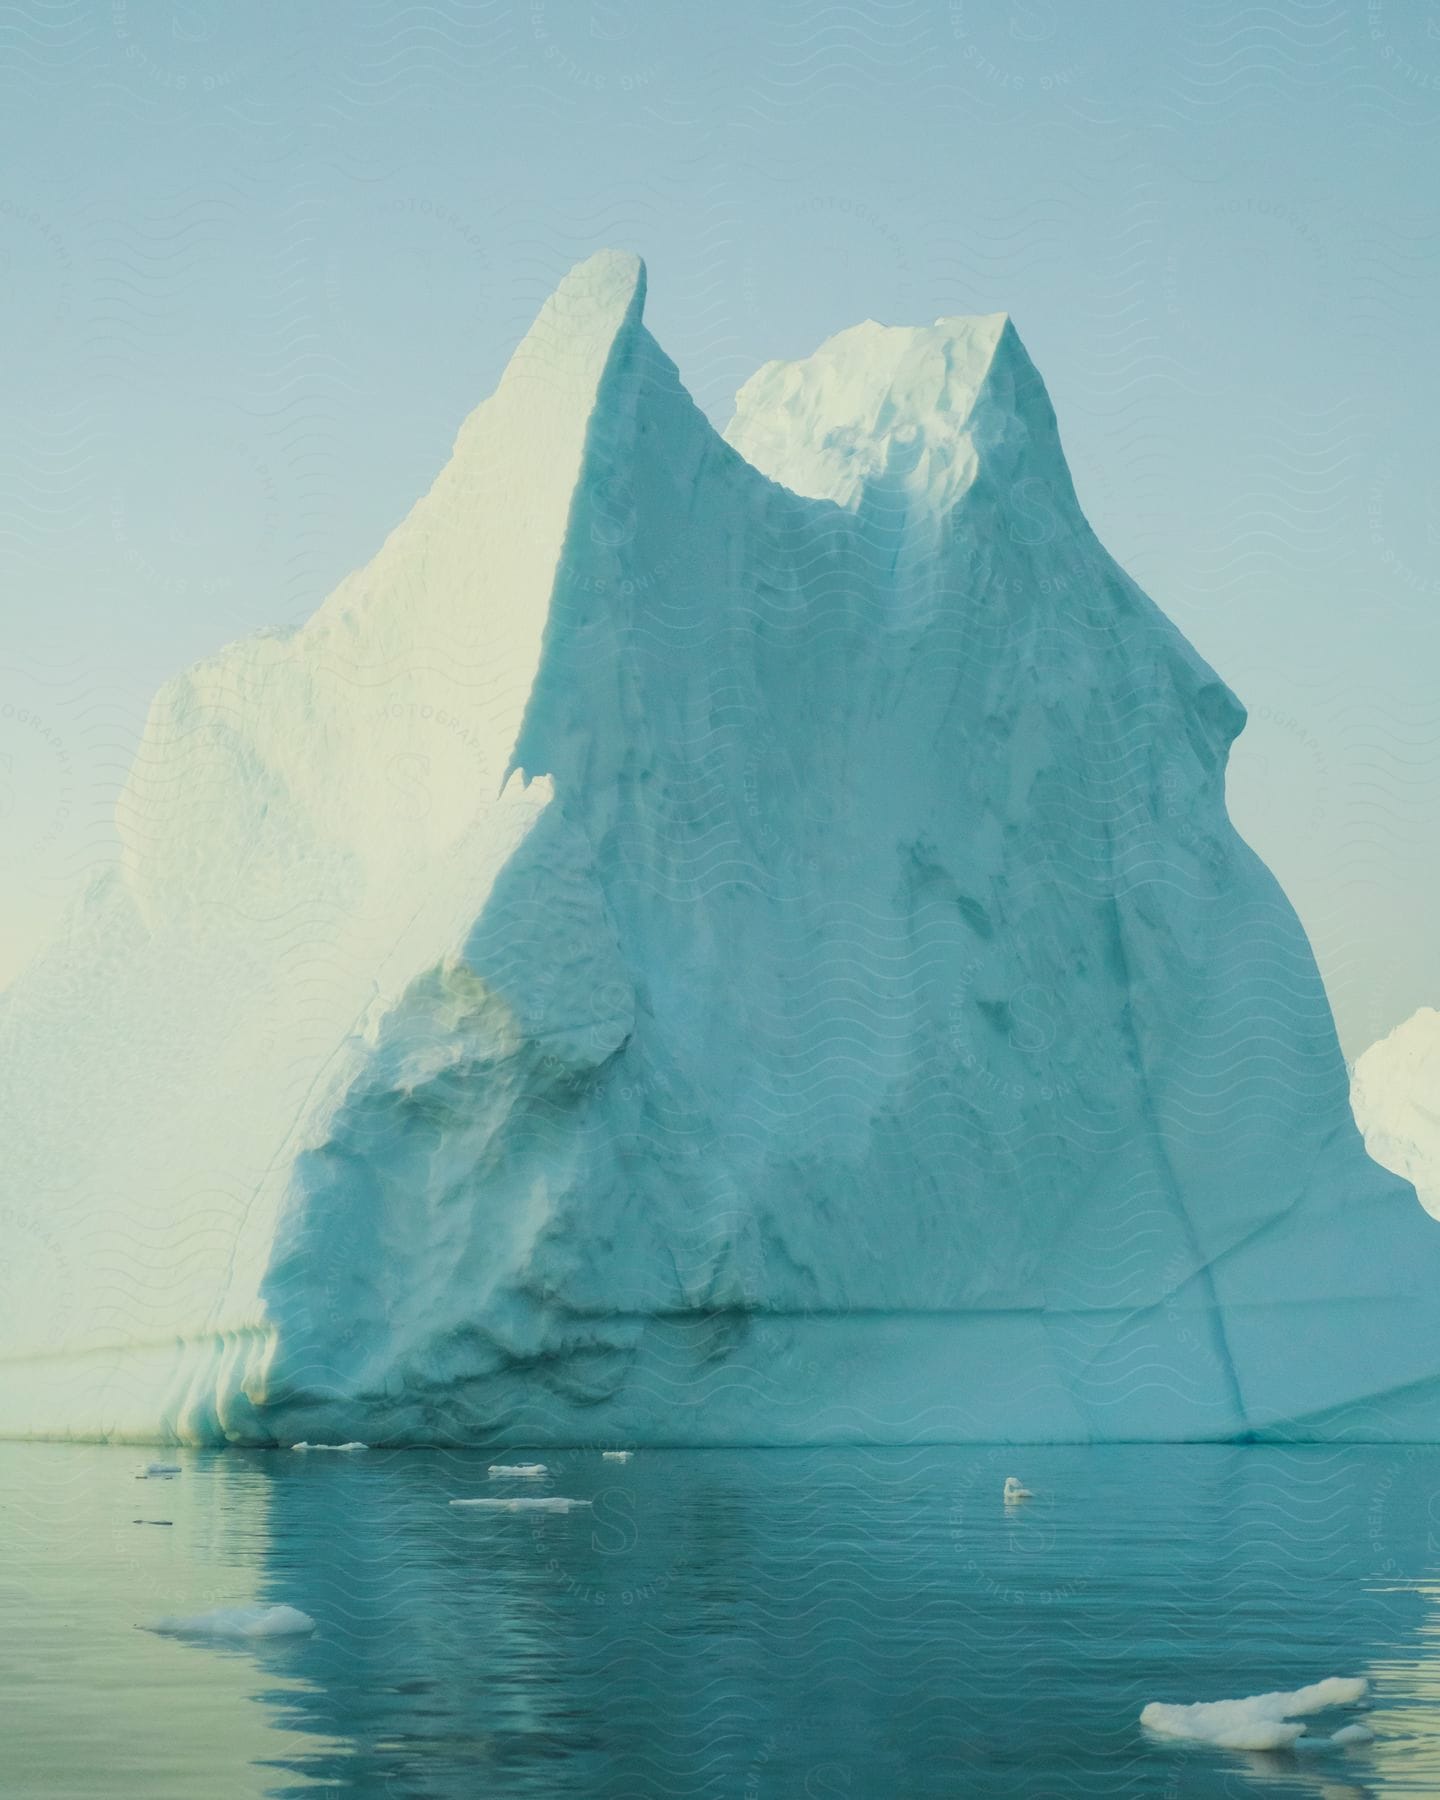 Ice berg floats on water